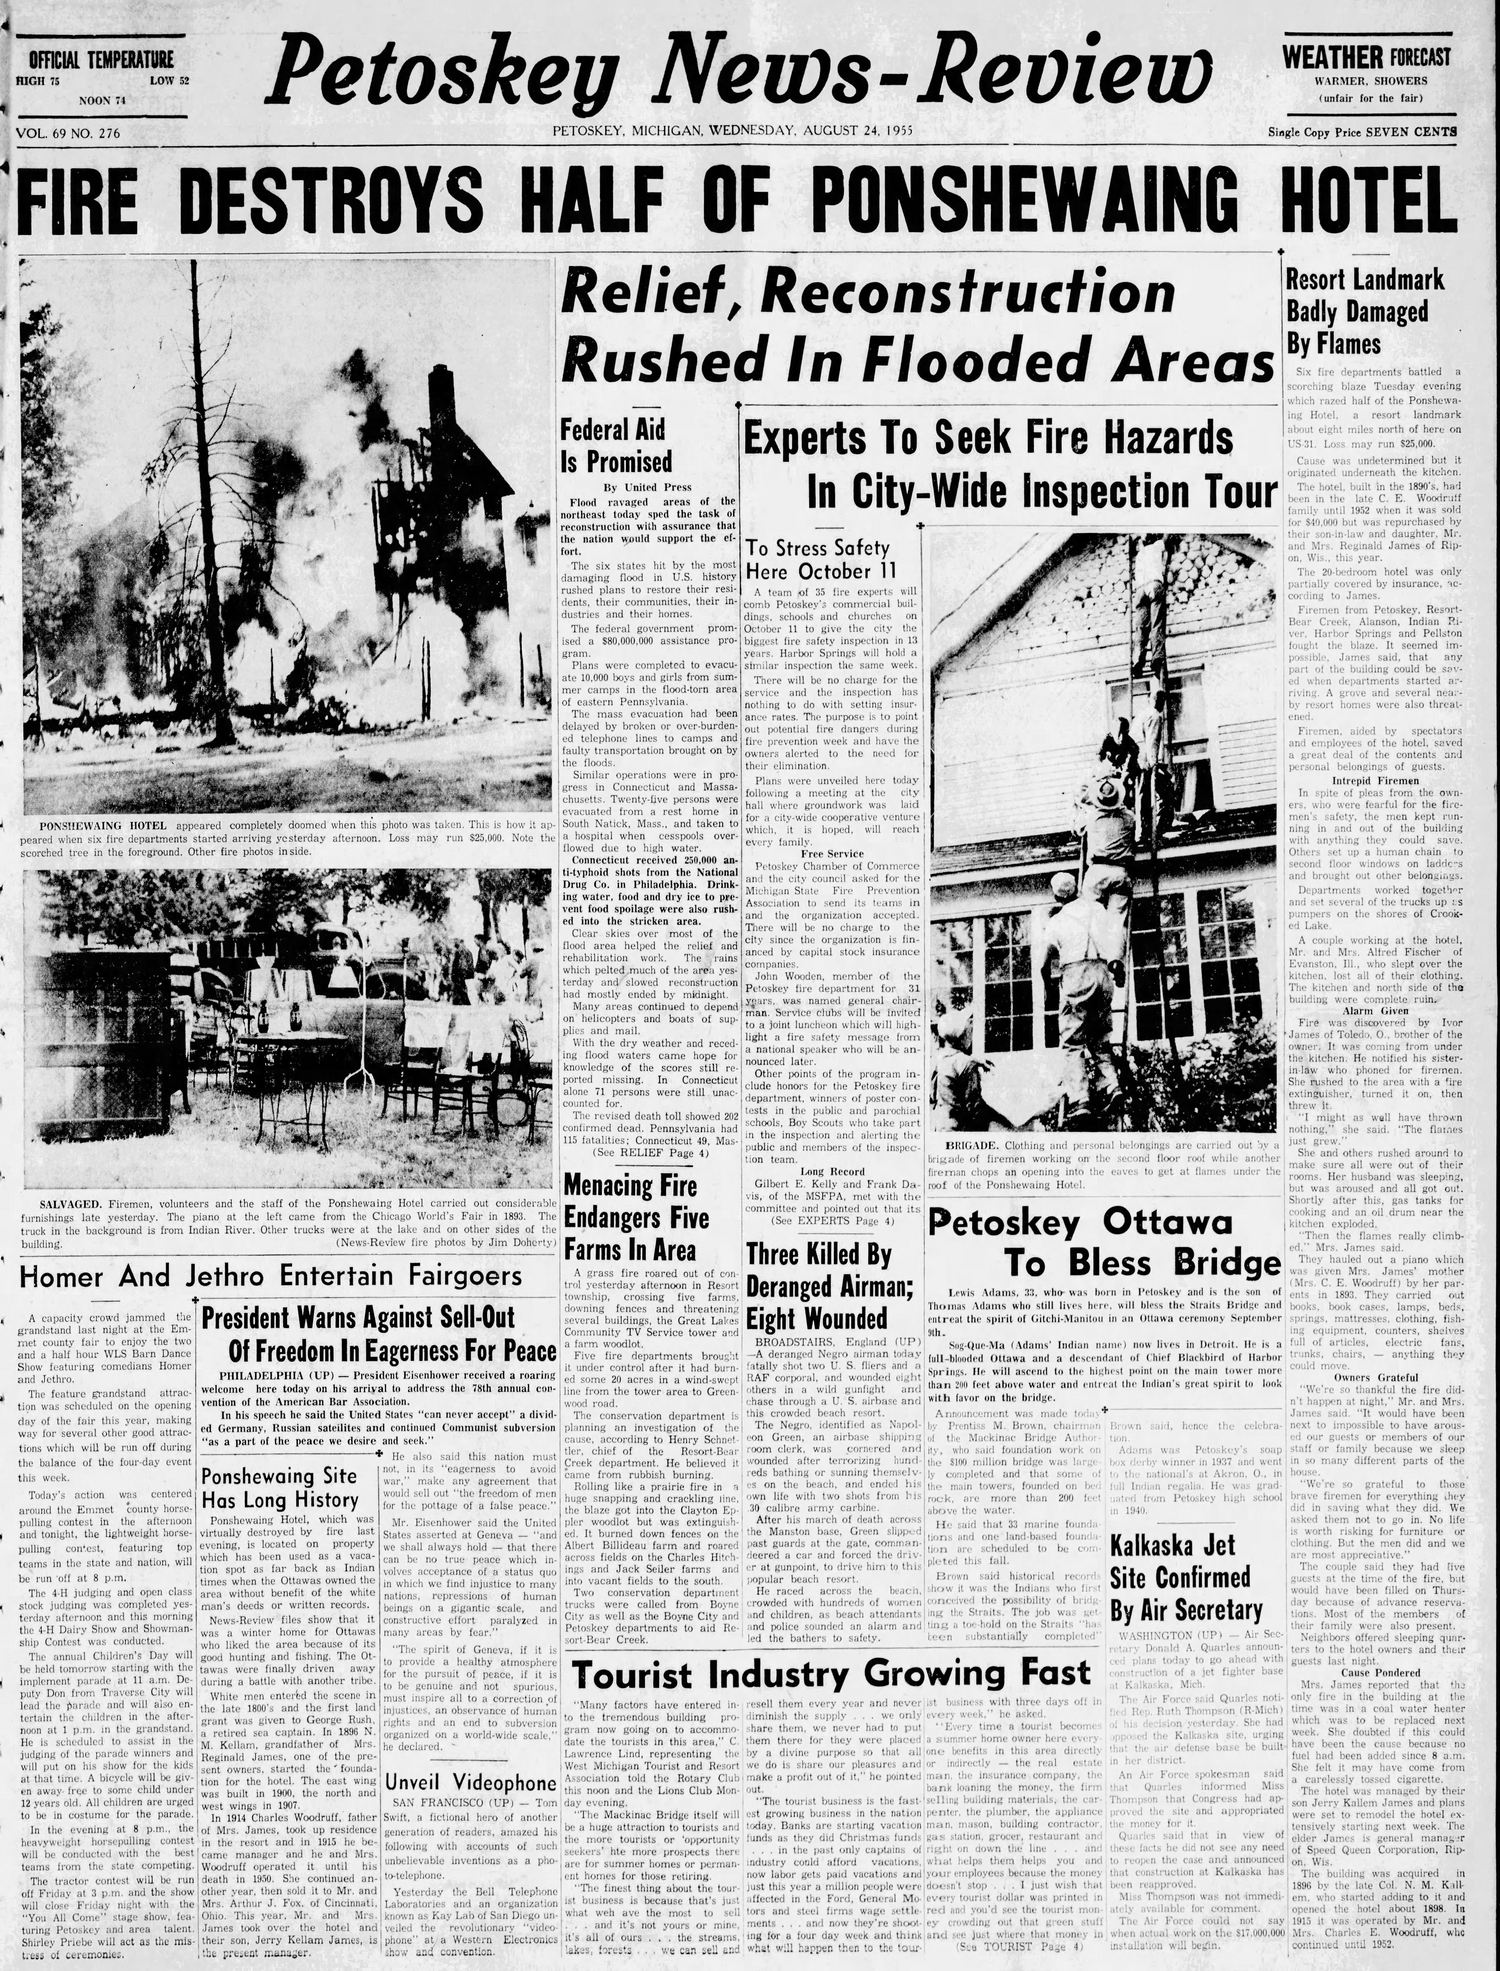 Ponshewaing Hotel - Aug 24 1955 Article On Fire (newer photo)